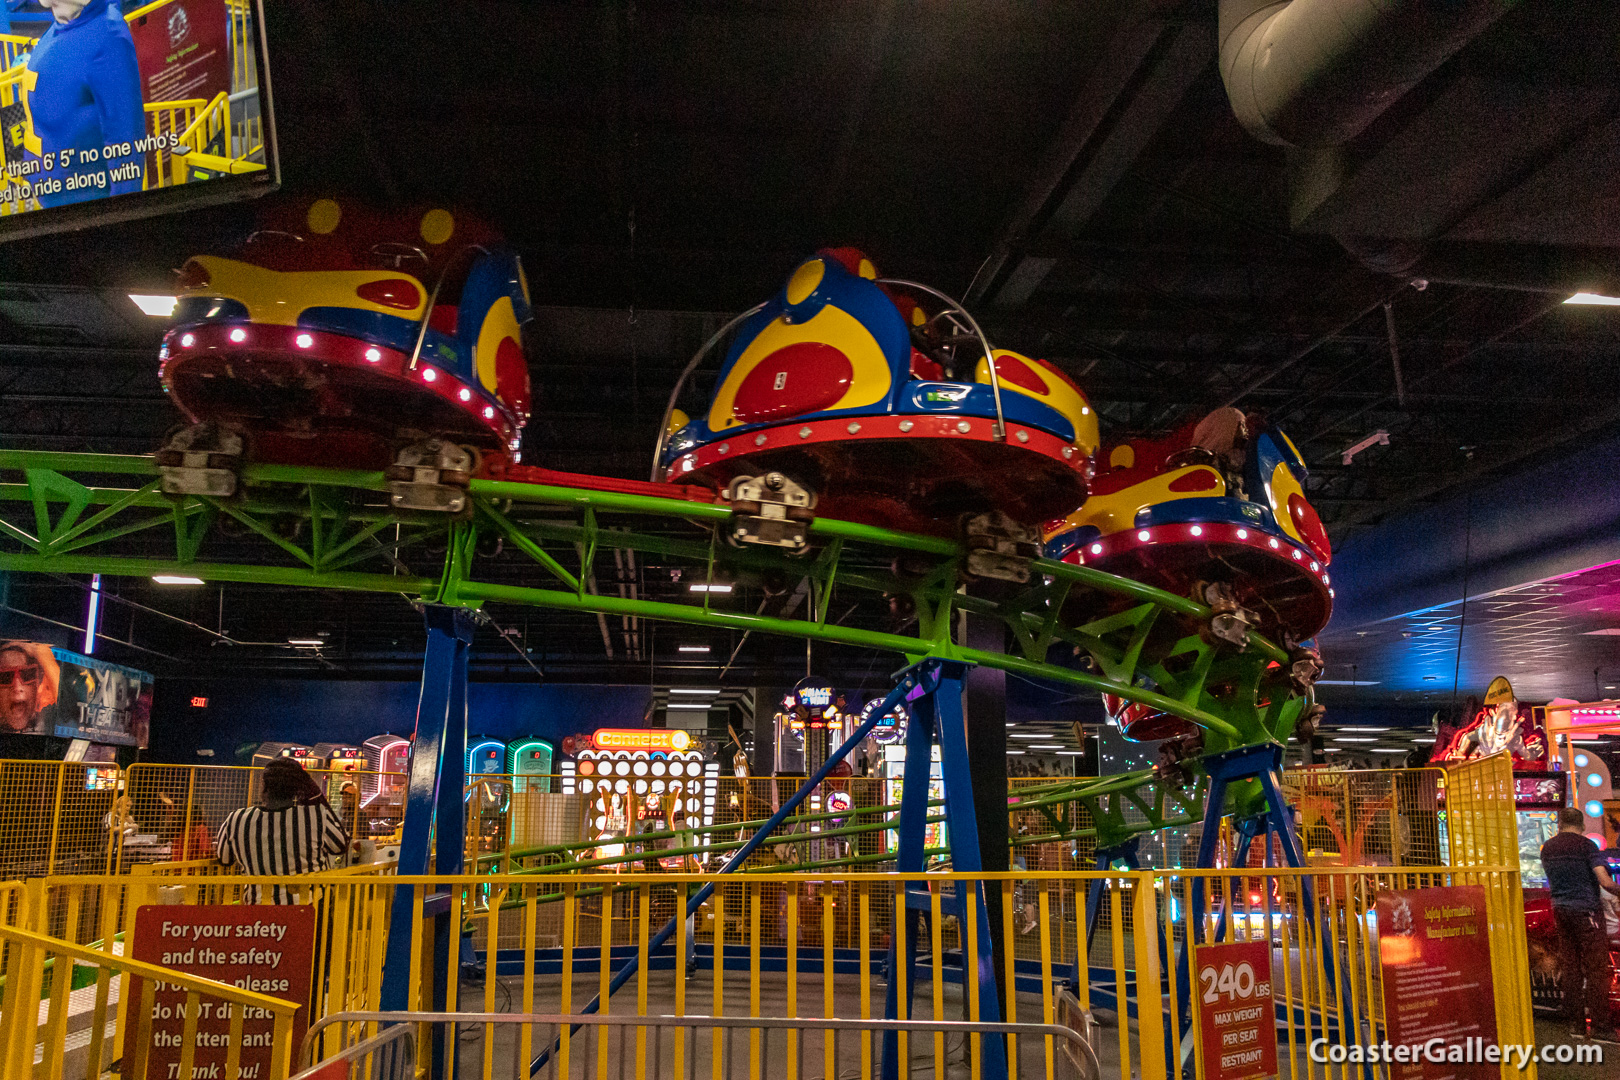 A spinning roller coaster - Incredible Spin Coaster at St. Louis's Incredible Pizza Company